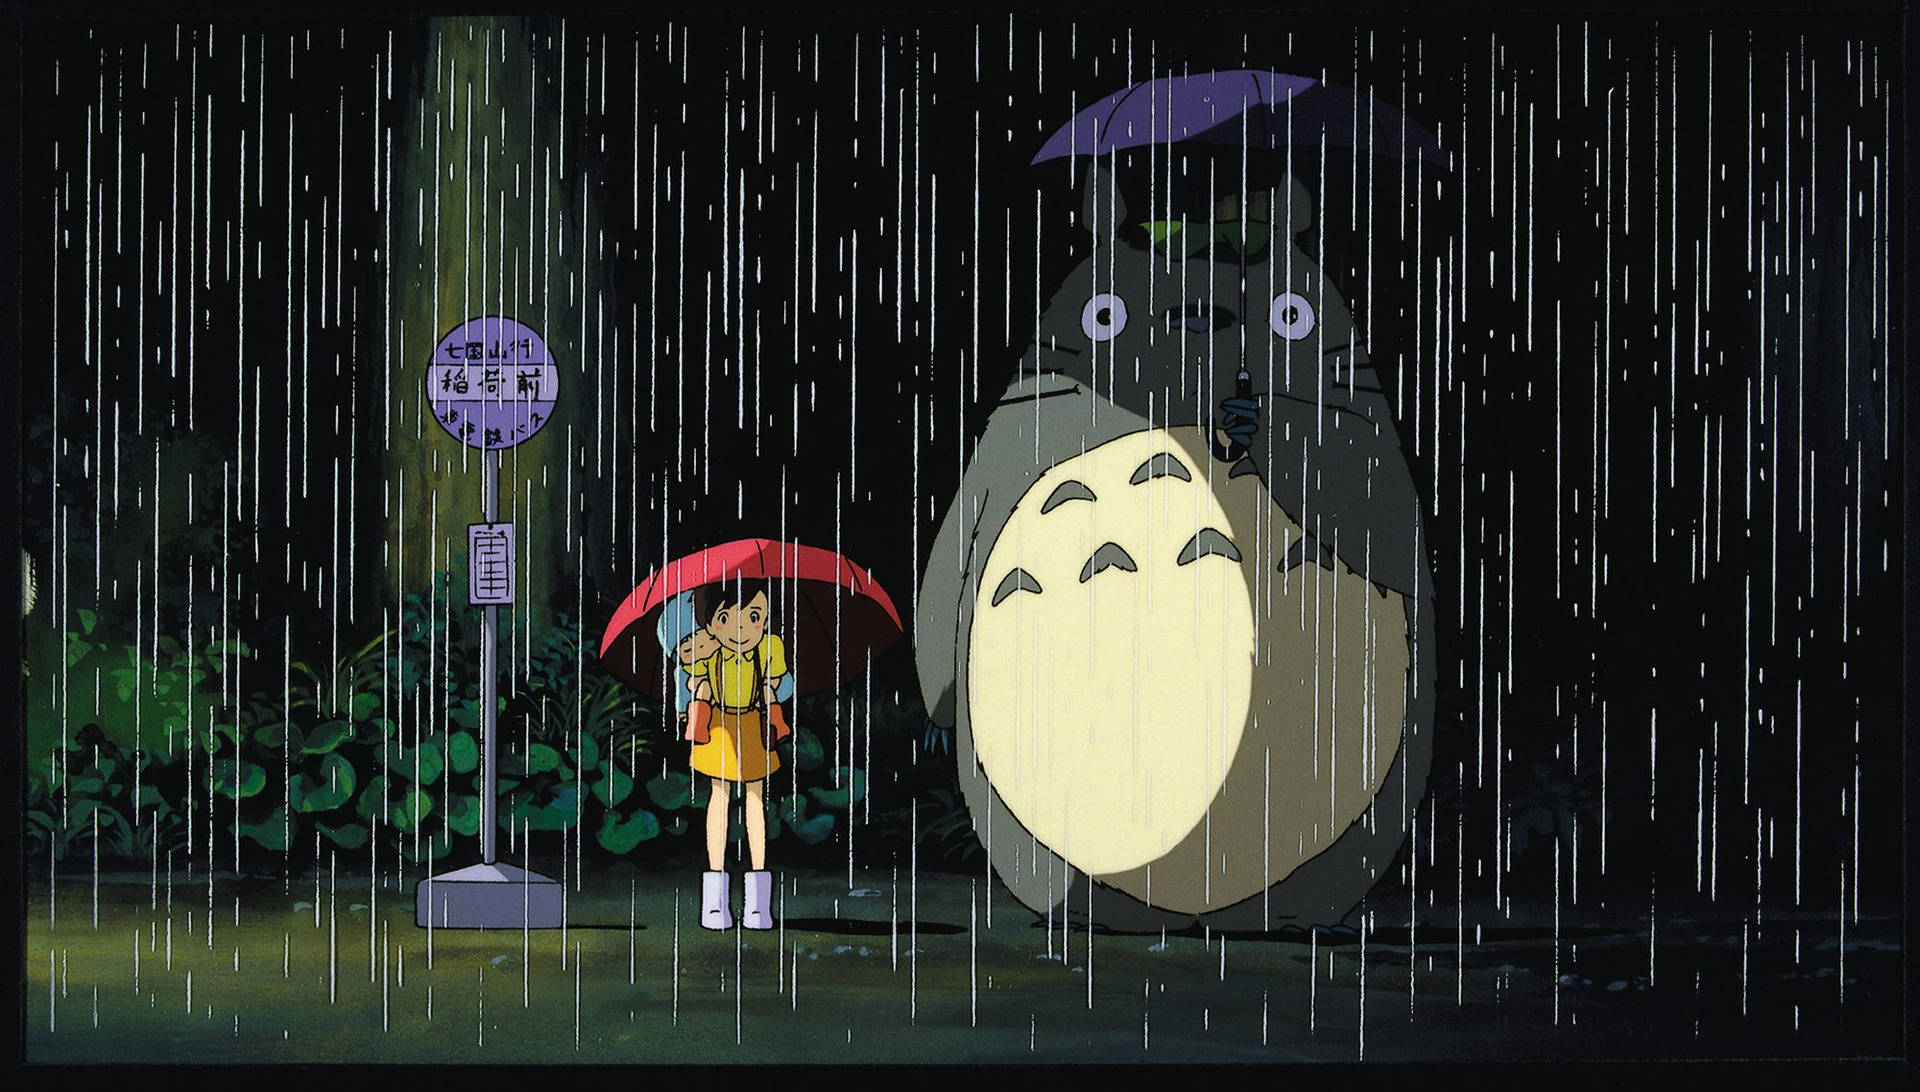 Satsuki and Mei embrace Totoro under the sheltering boughs of a magical tree during a rainstorm. Wallpaper